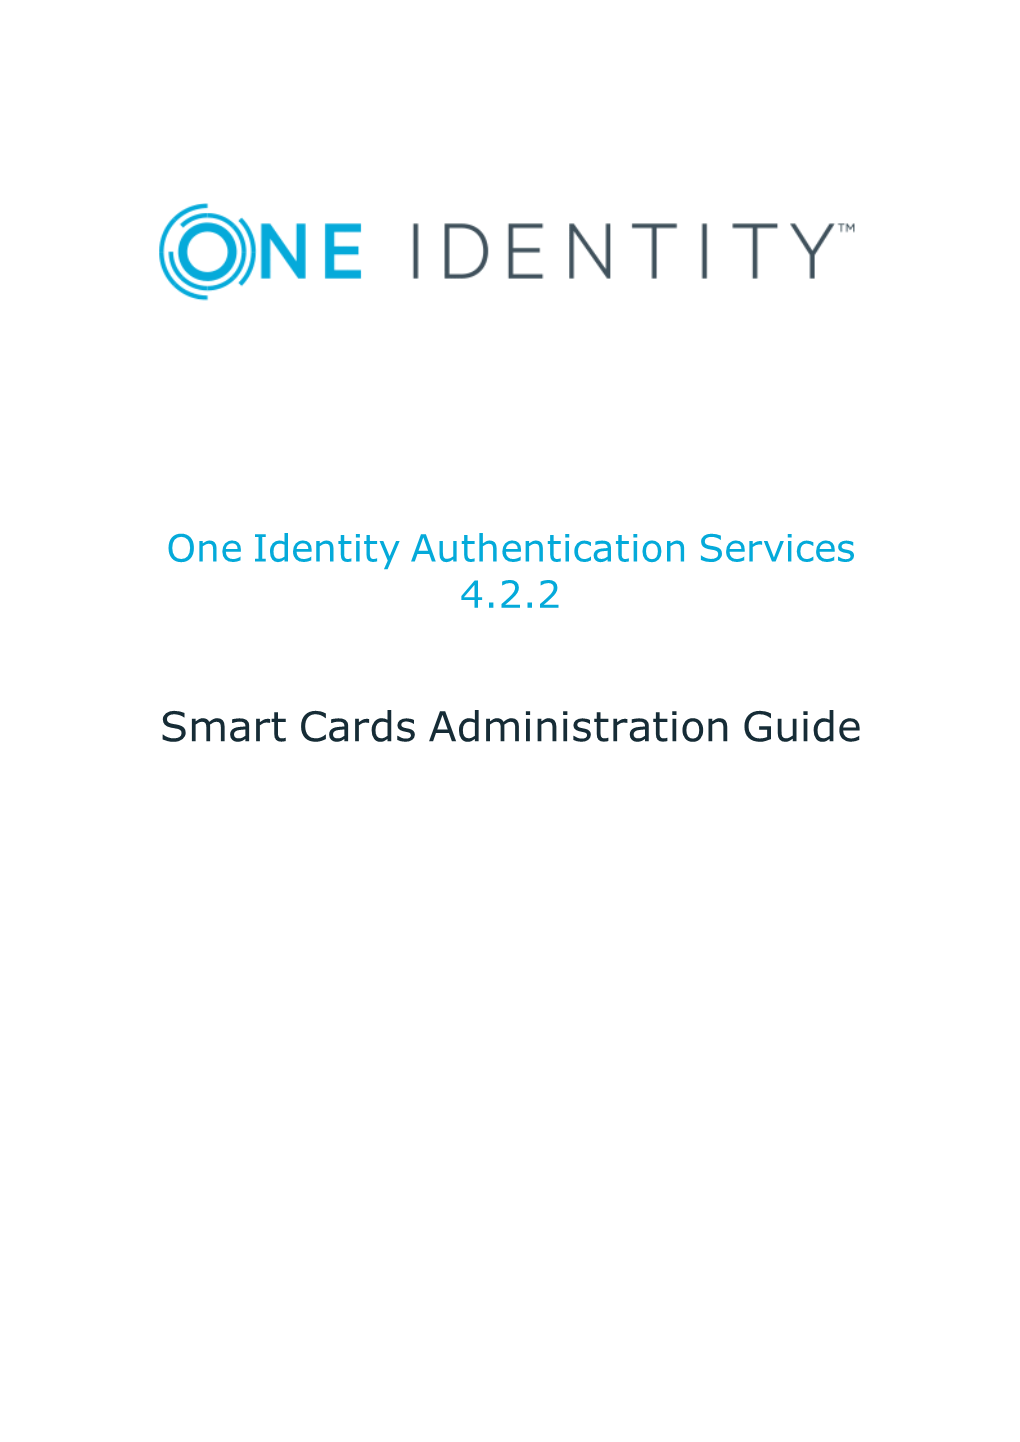 One Identity Authentication Services Smart Card